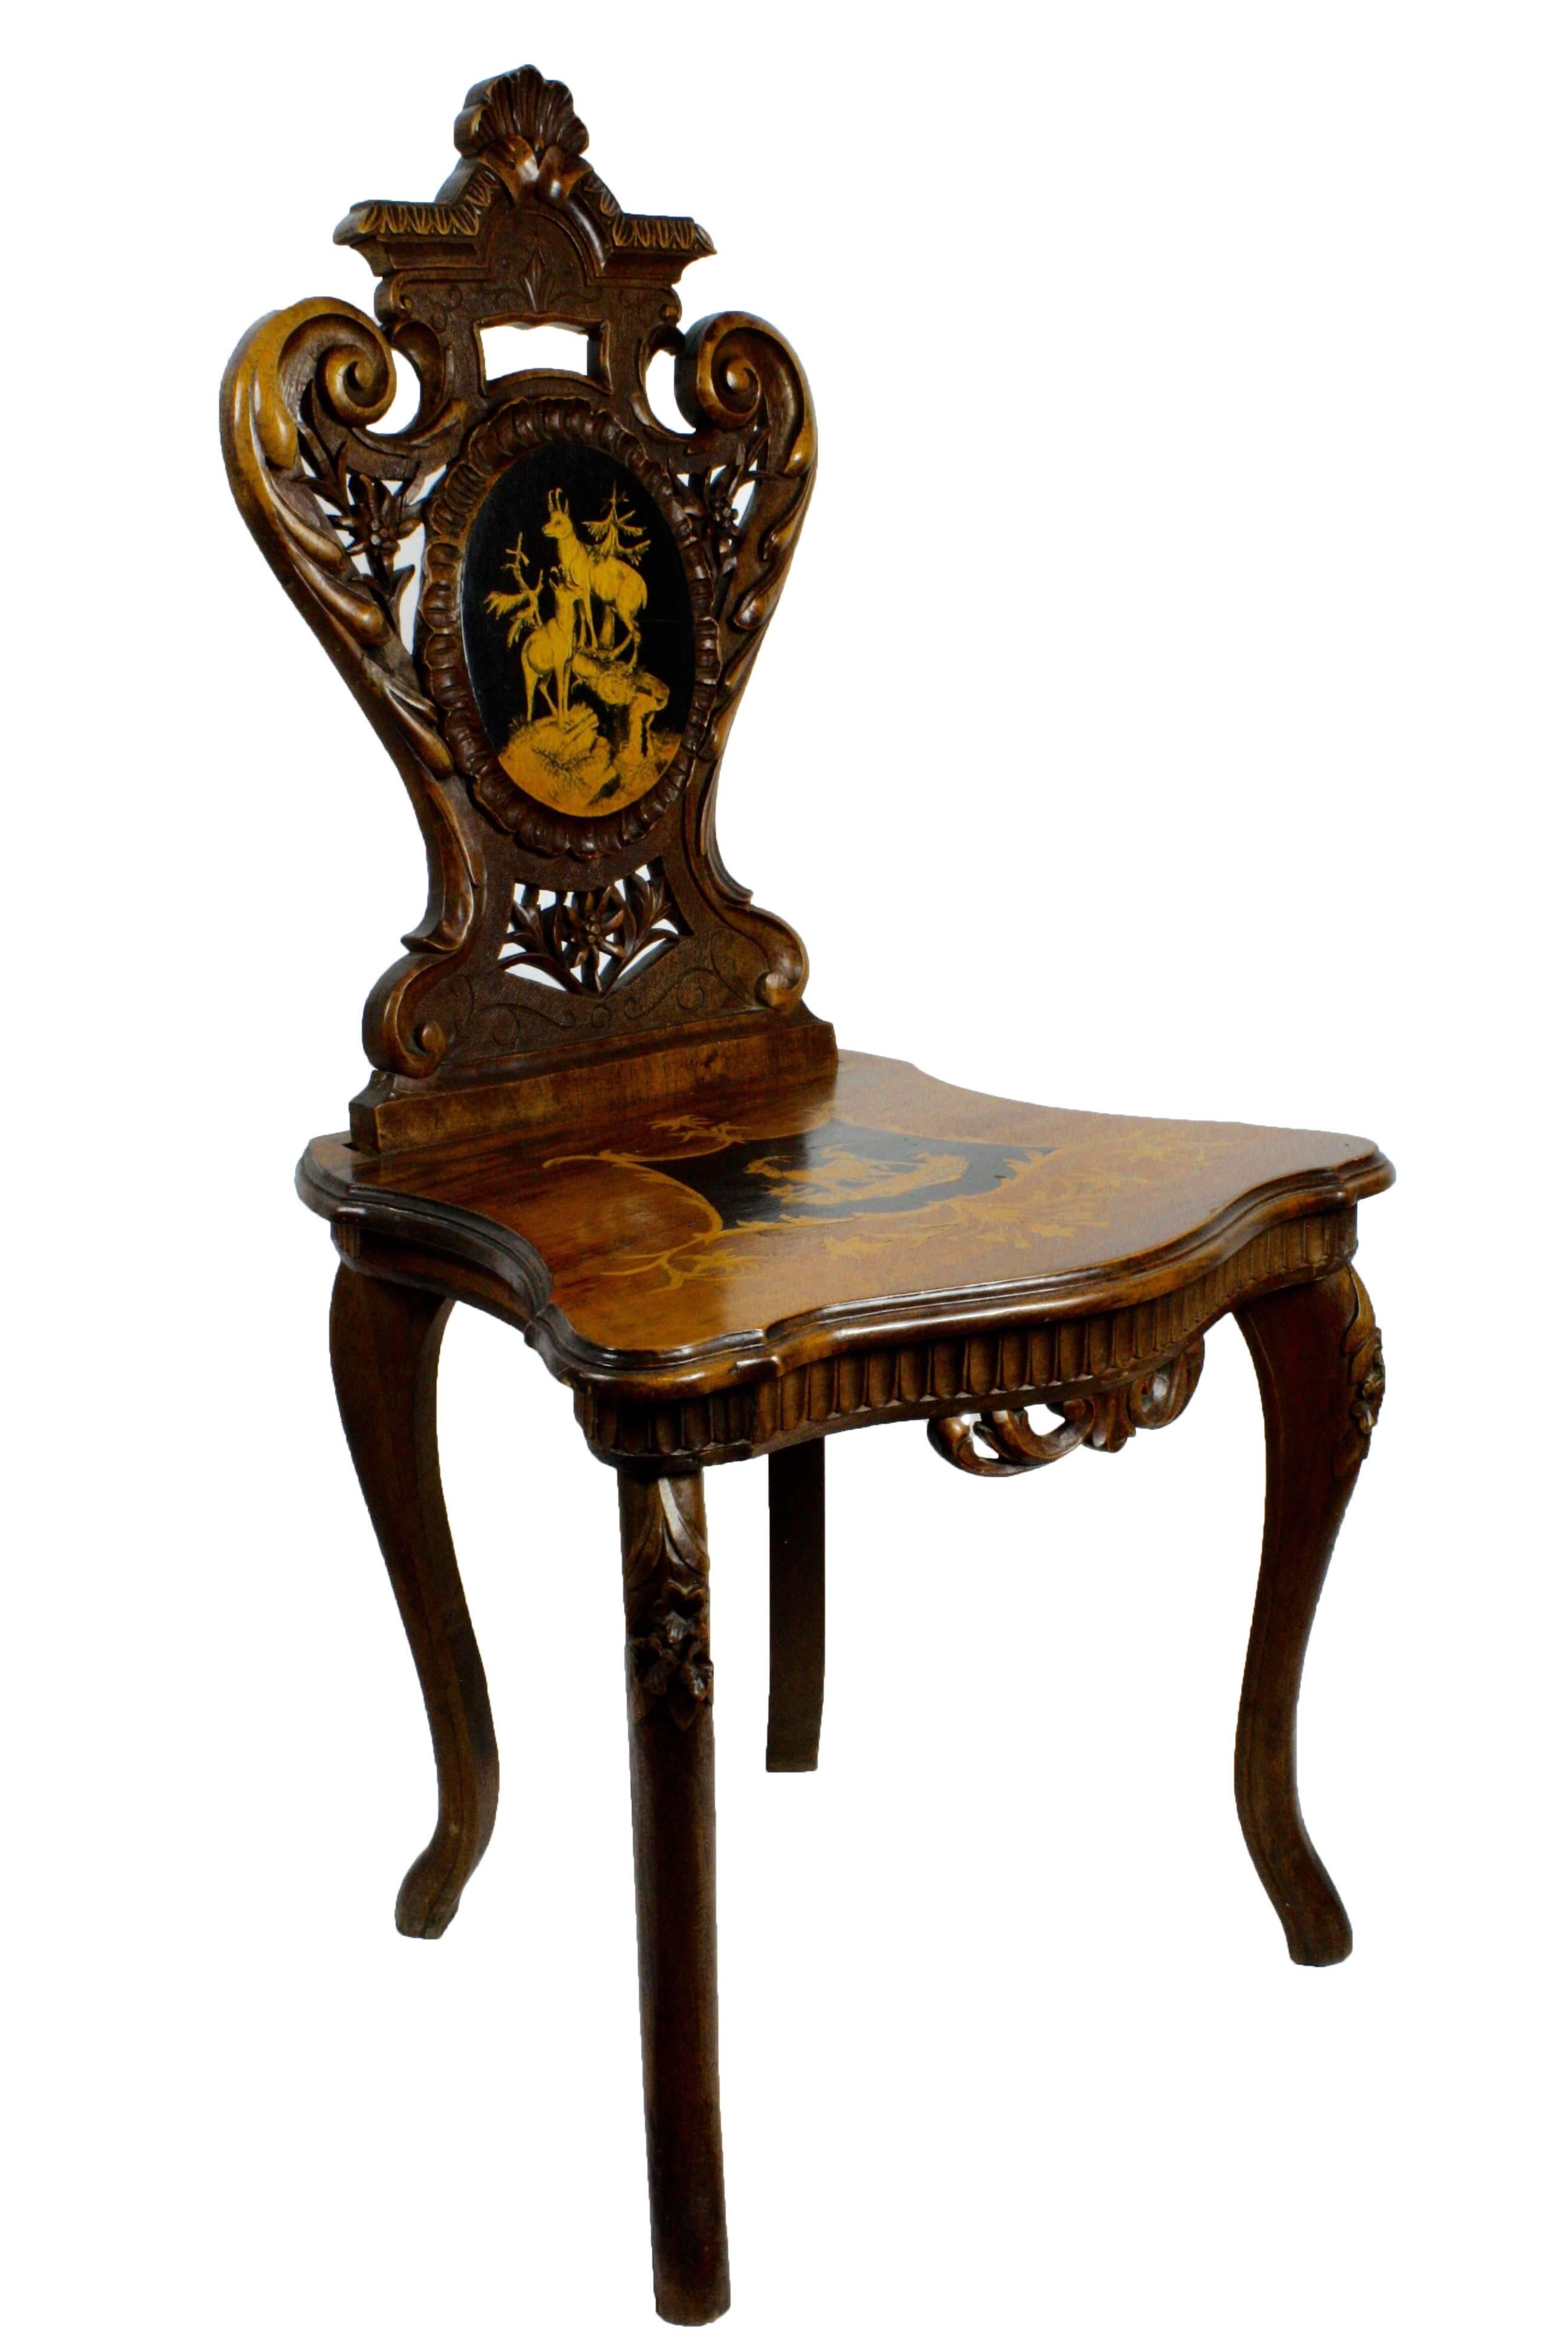 A beautifully executed and inlaid example of late 19th, early 20th century, Brienz Swiss carving and craftsmanship. Featuring Ibex and chamois inlay in the seat and back, with edelweiss and lovely scrolling.